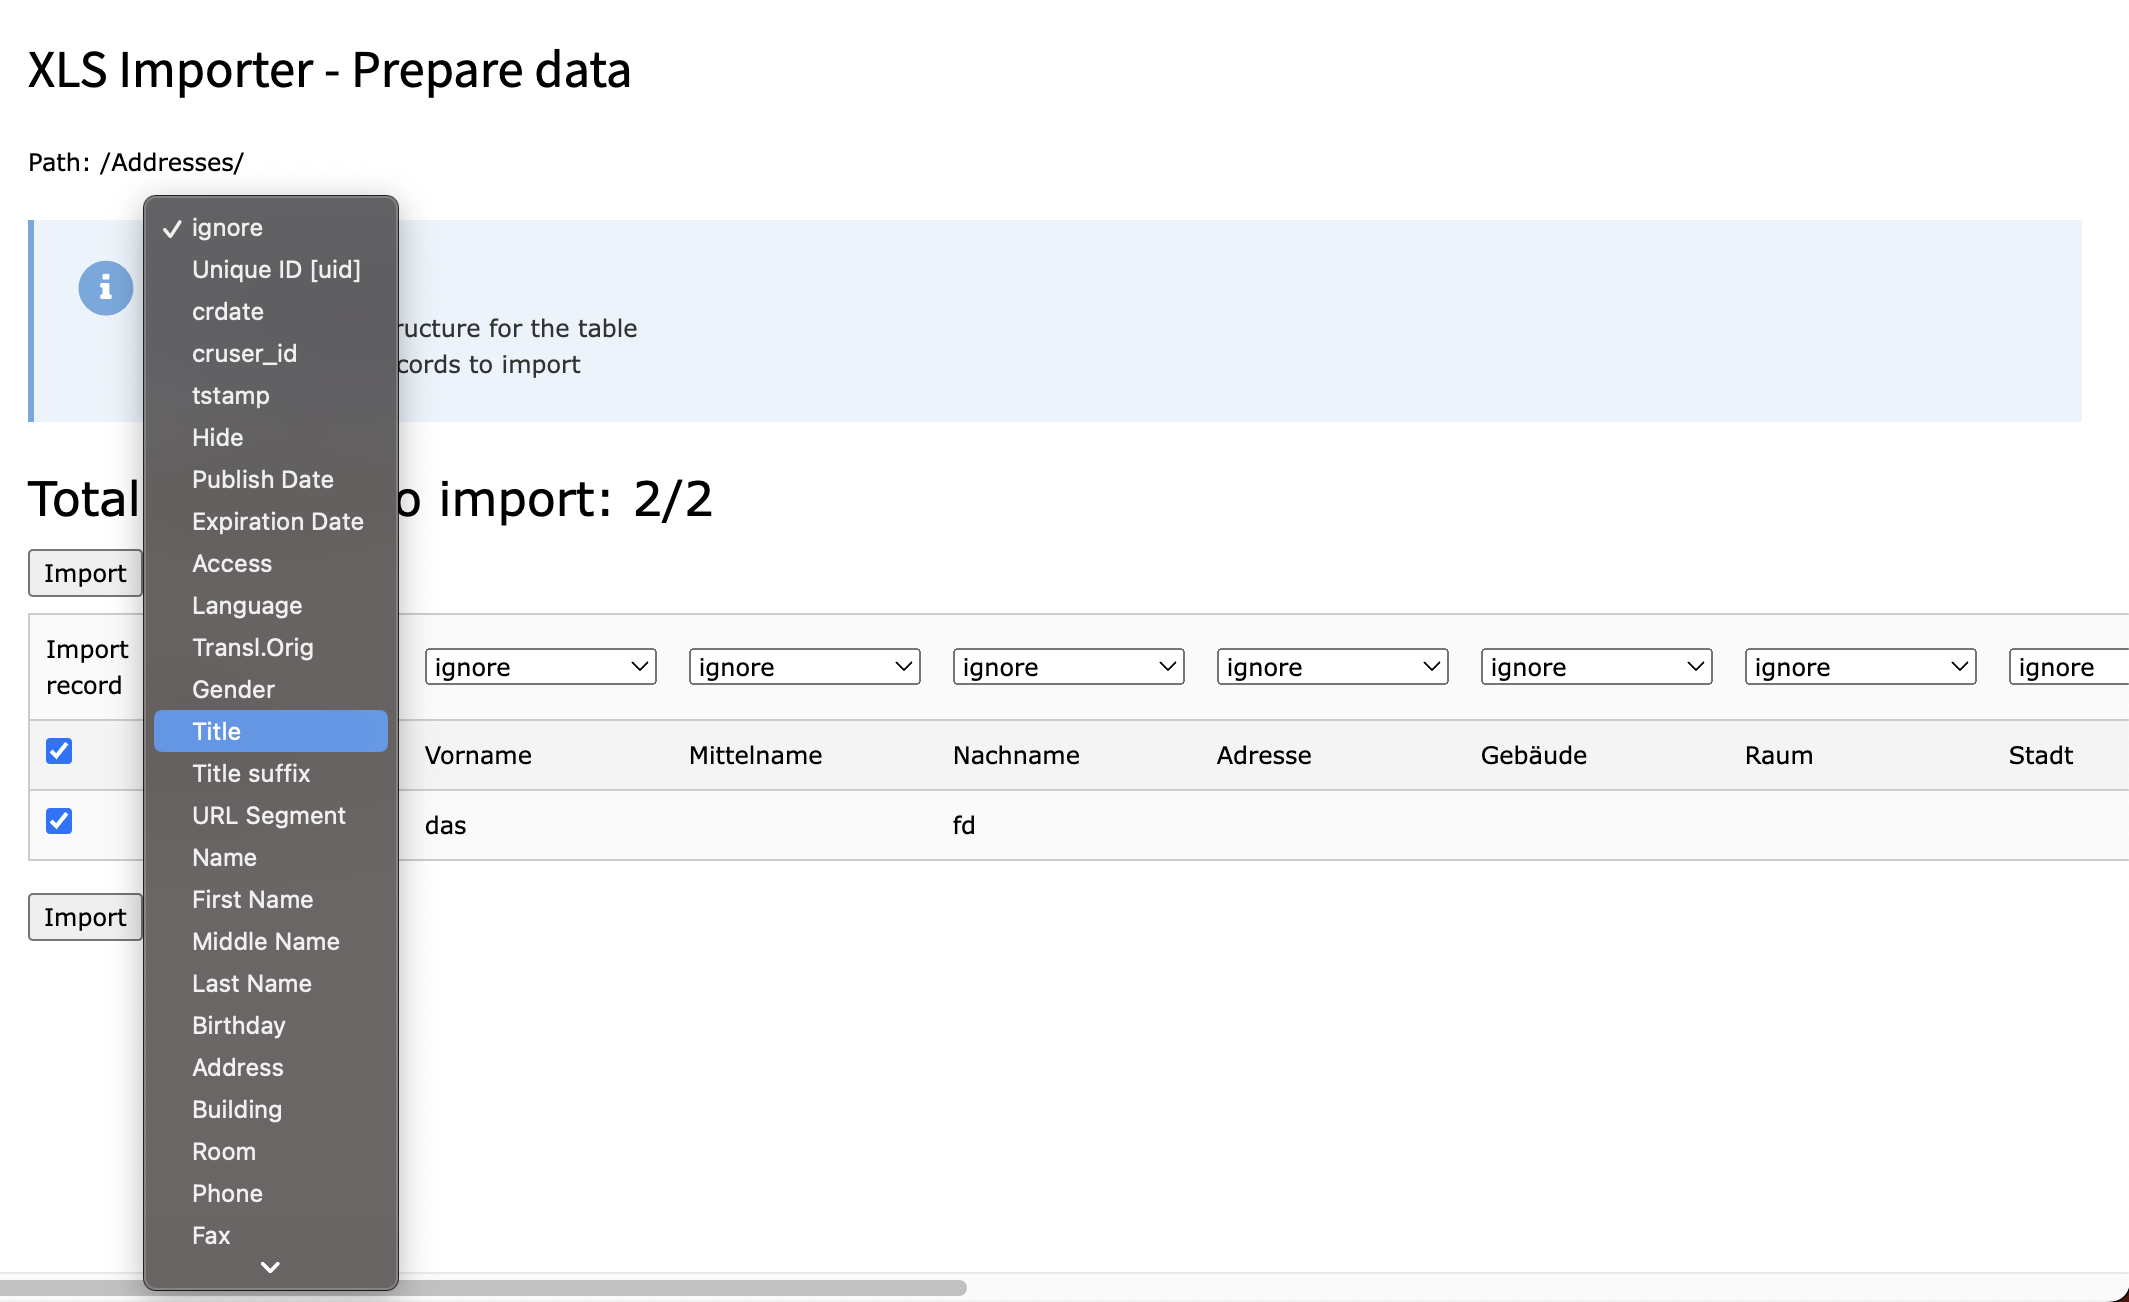 View for imported data with opened select